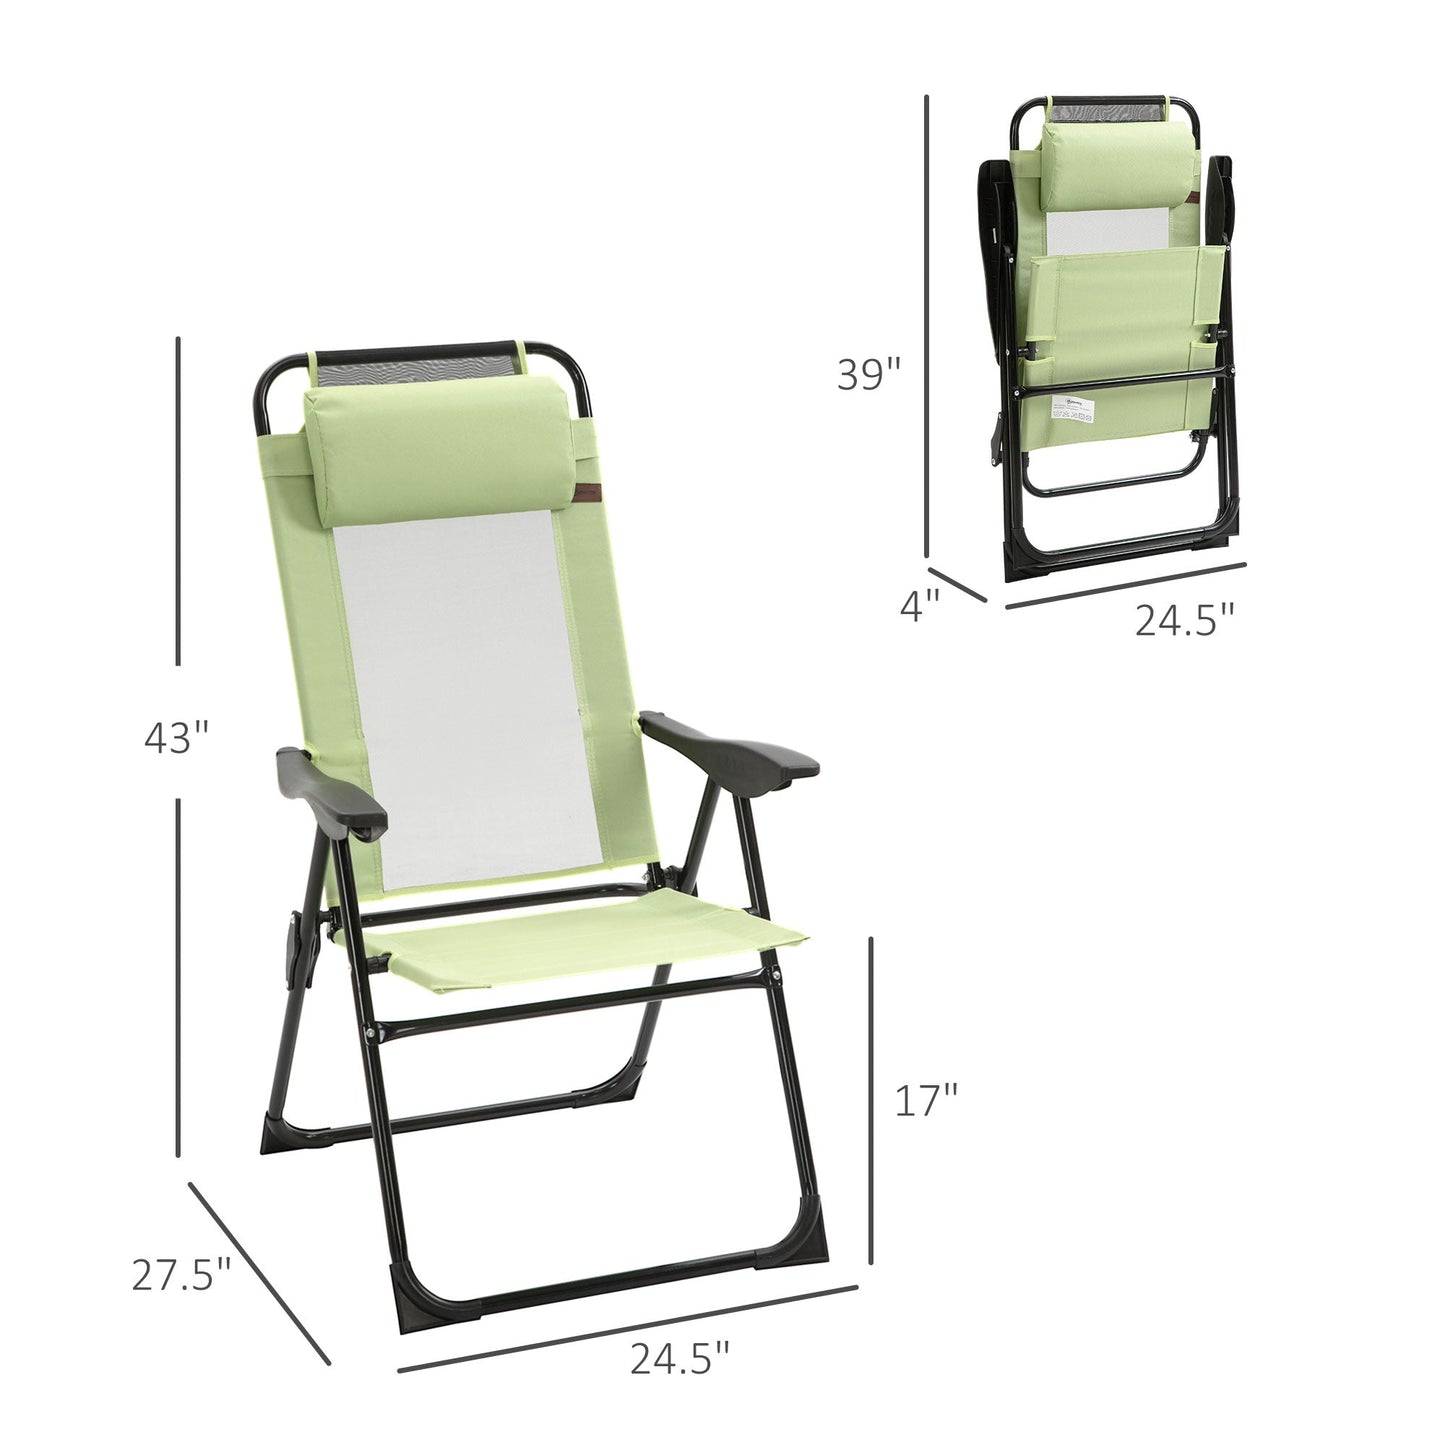 Outdoor and Garden-Set of 2 Portable Folding Recliner Outdoor Patio Chaise Lounge Chair with Adjustable Backrest, Green - Outdoor Style Company